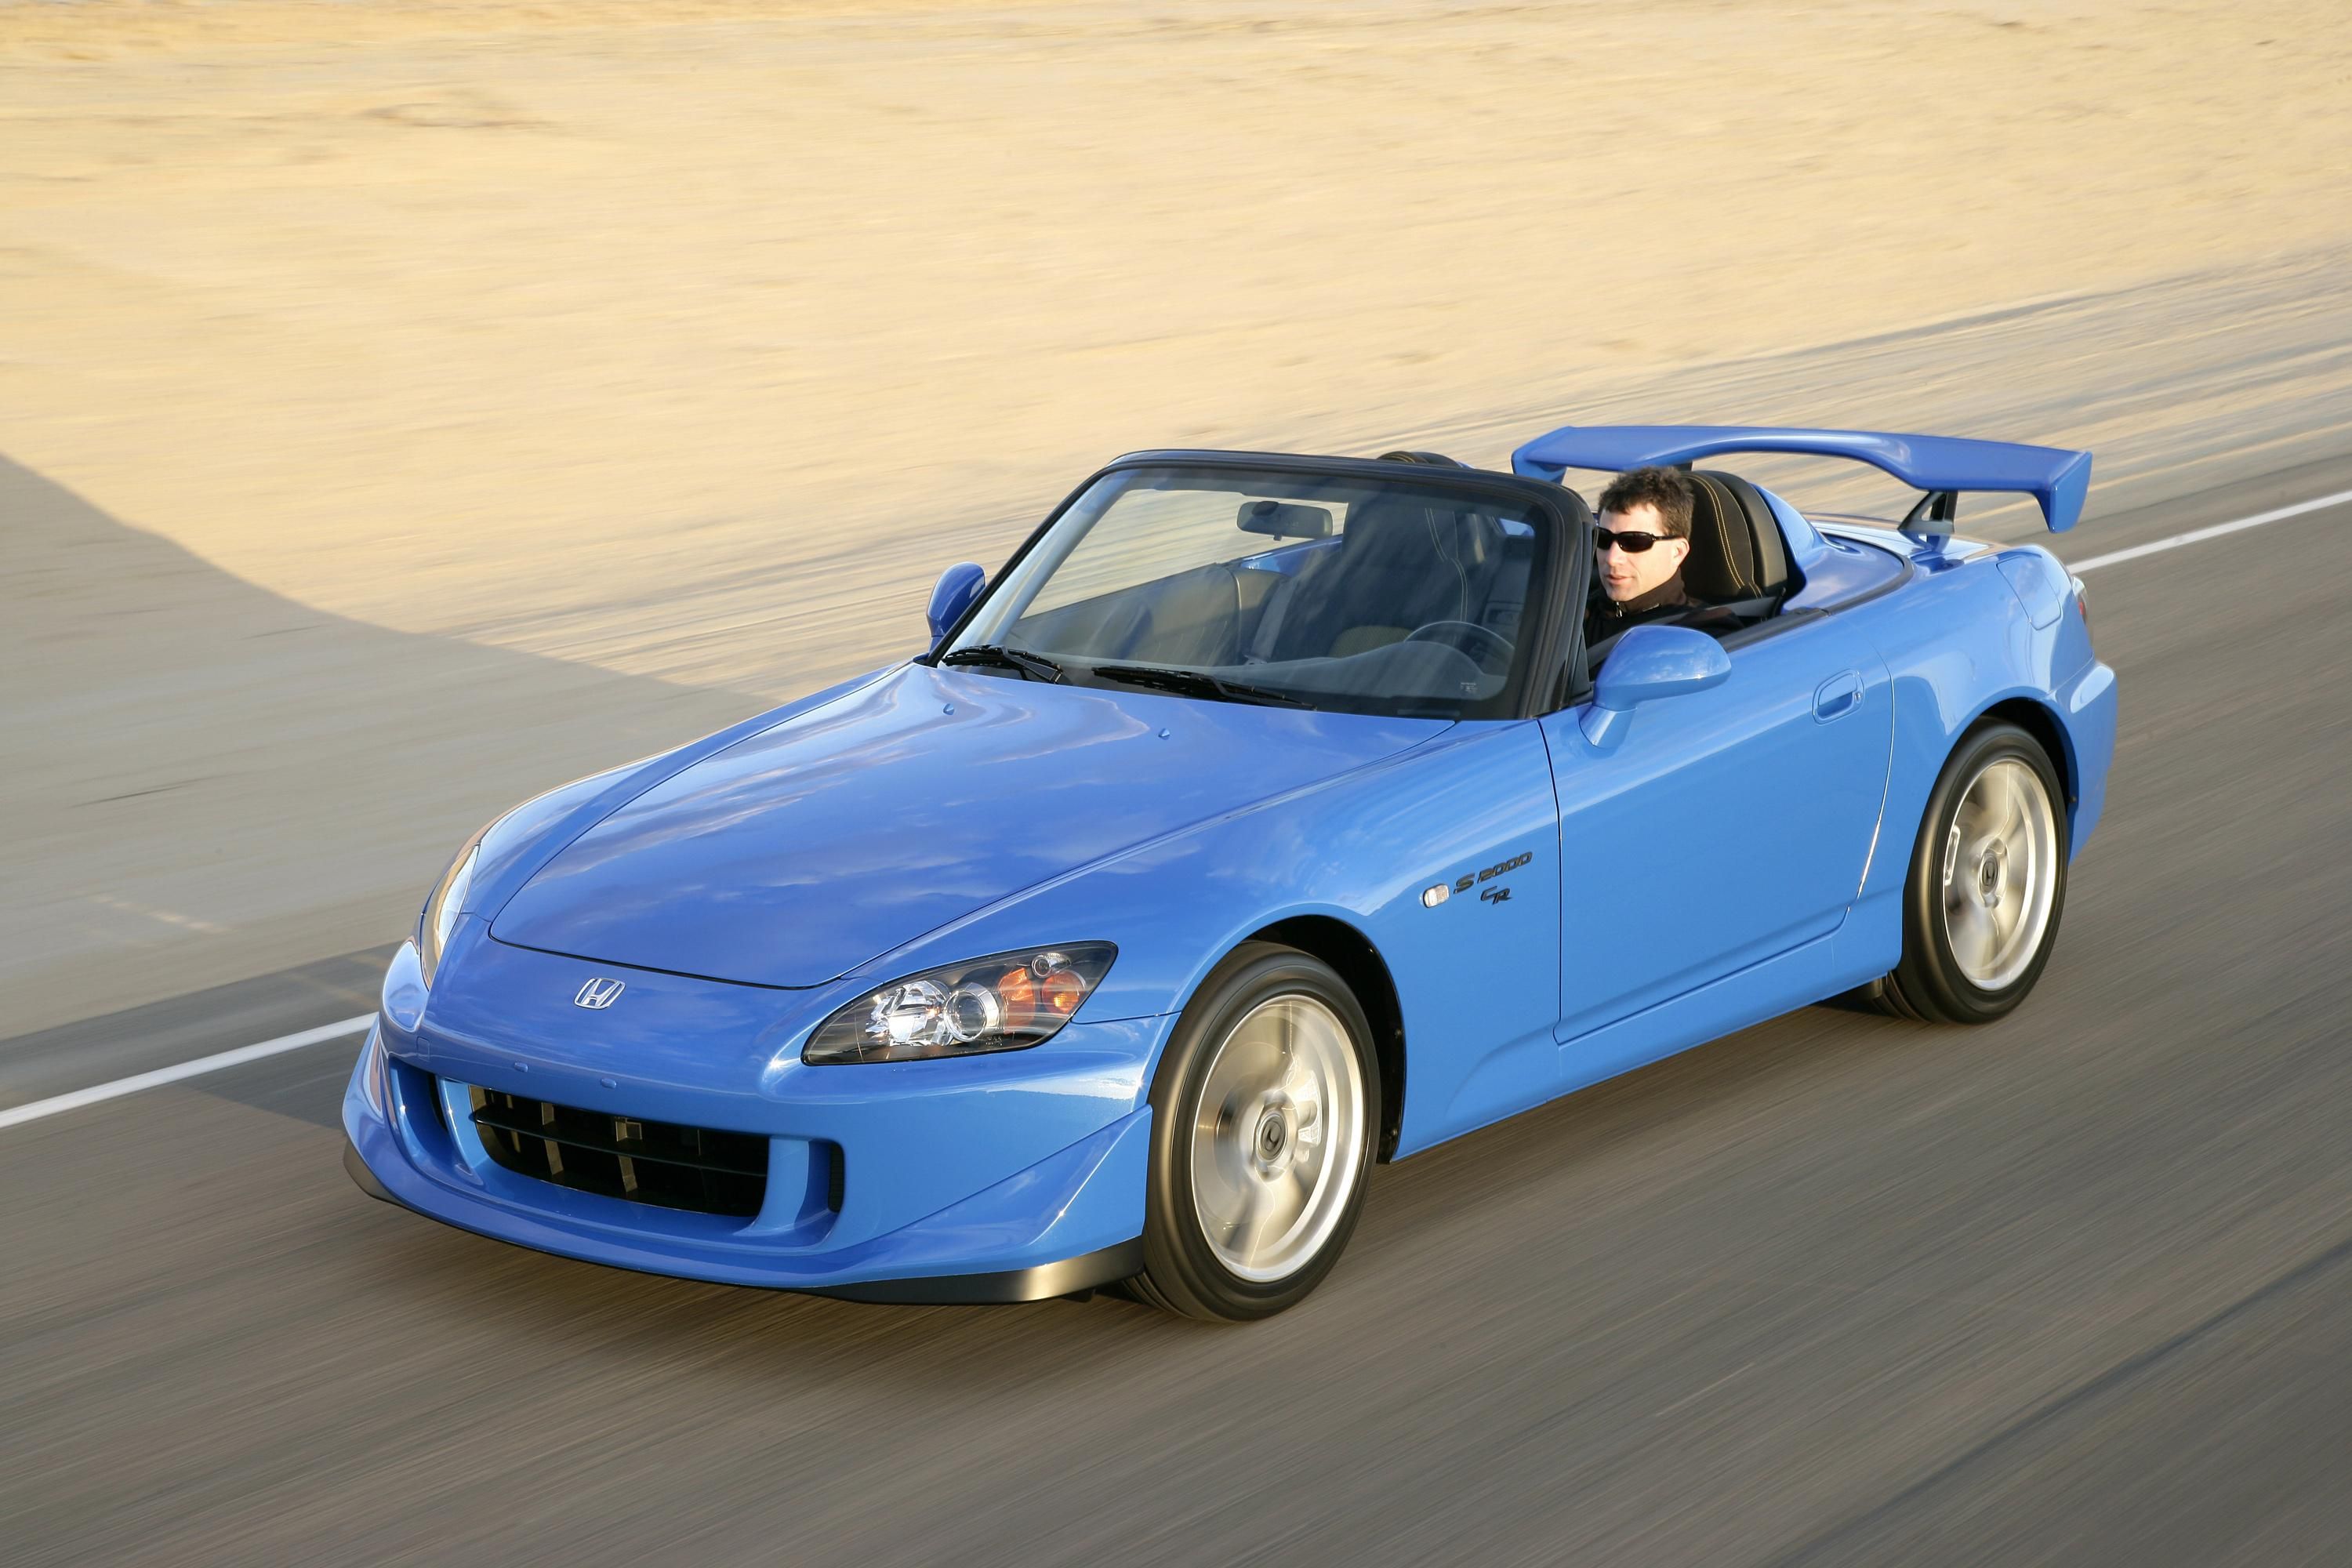 2007 Honda S2000 CR only for the US market